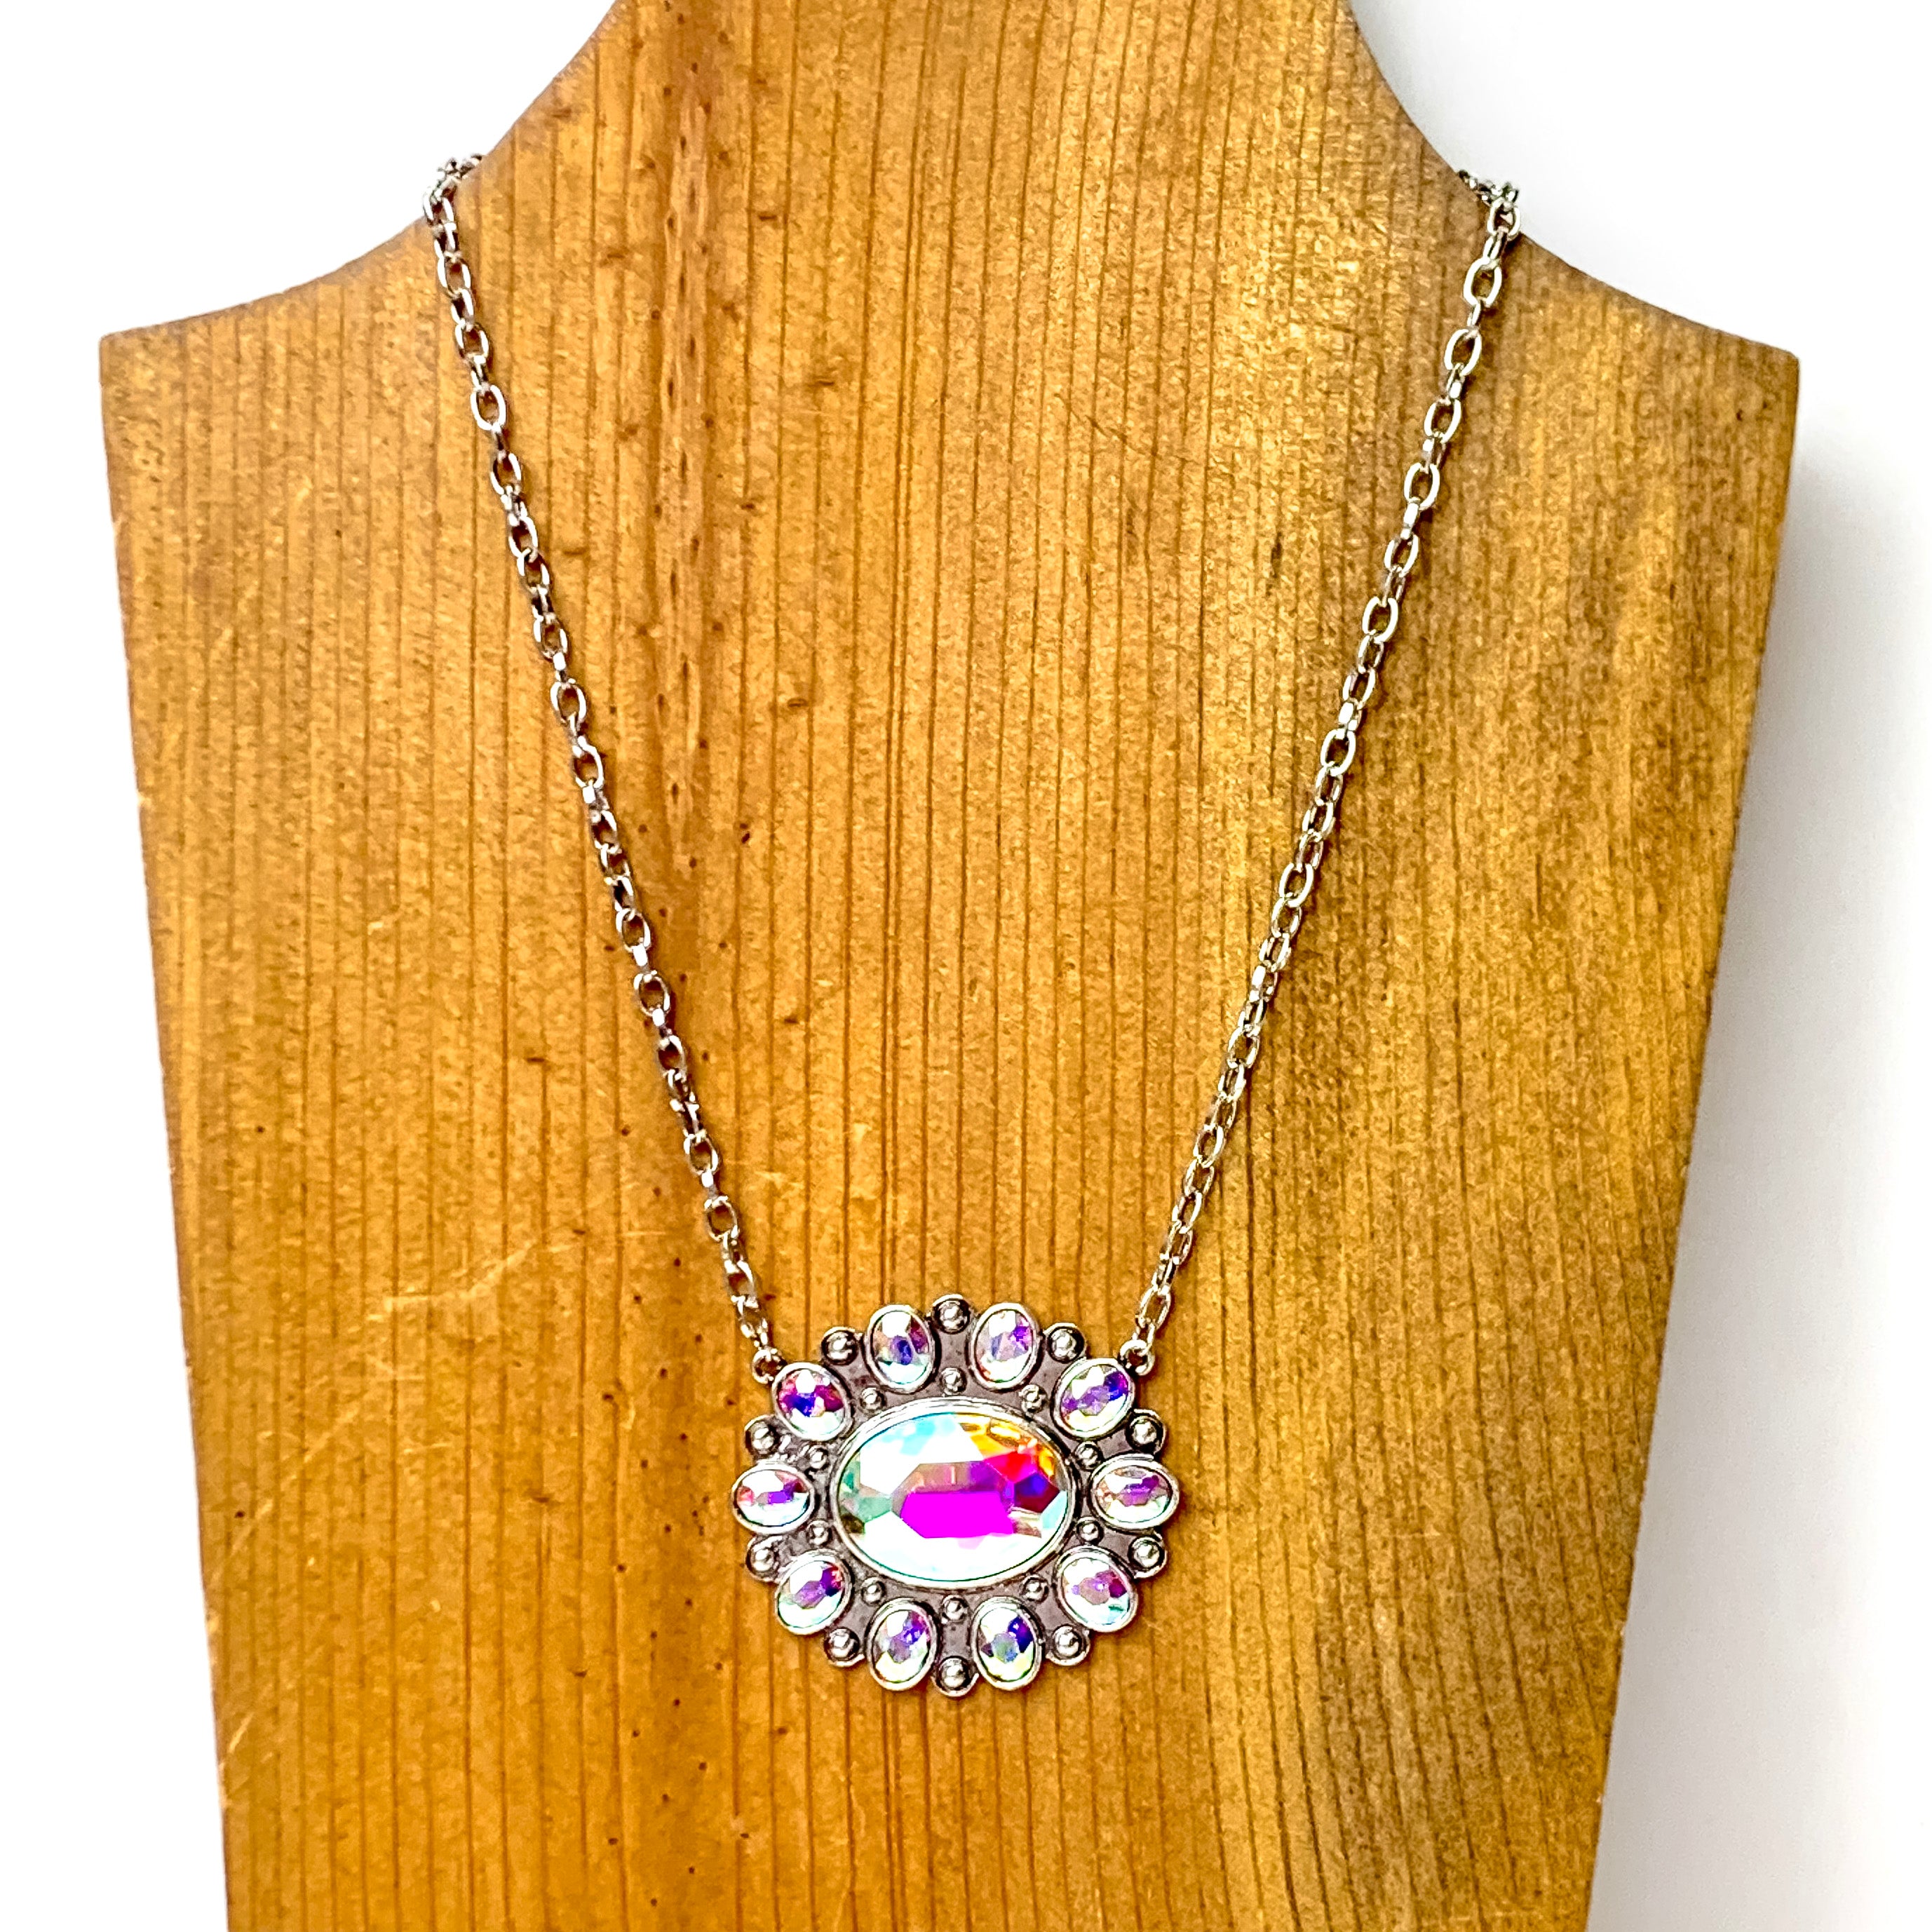 Desert Diva Concho Necklace in Silver Tone - Giddy Up Glamour Boutique